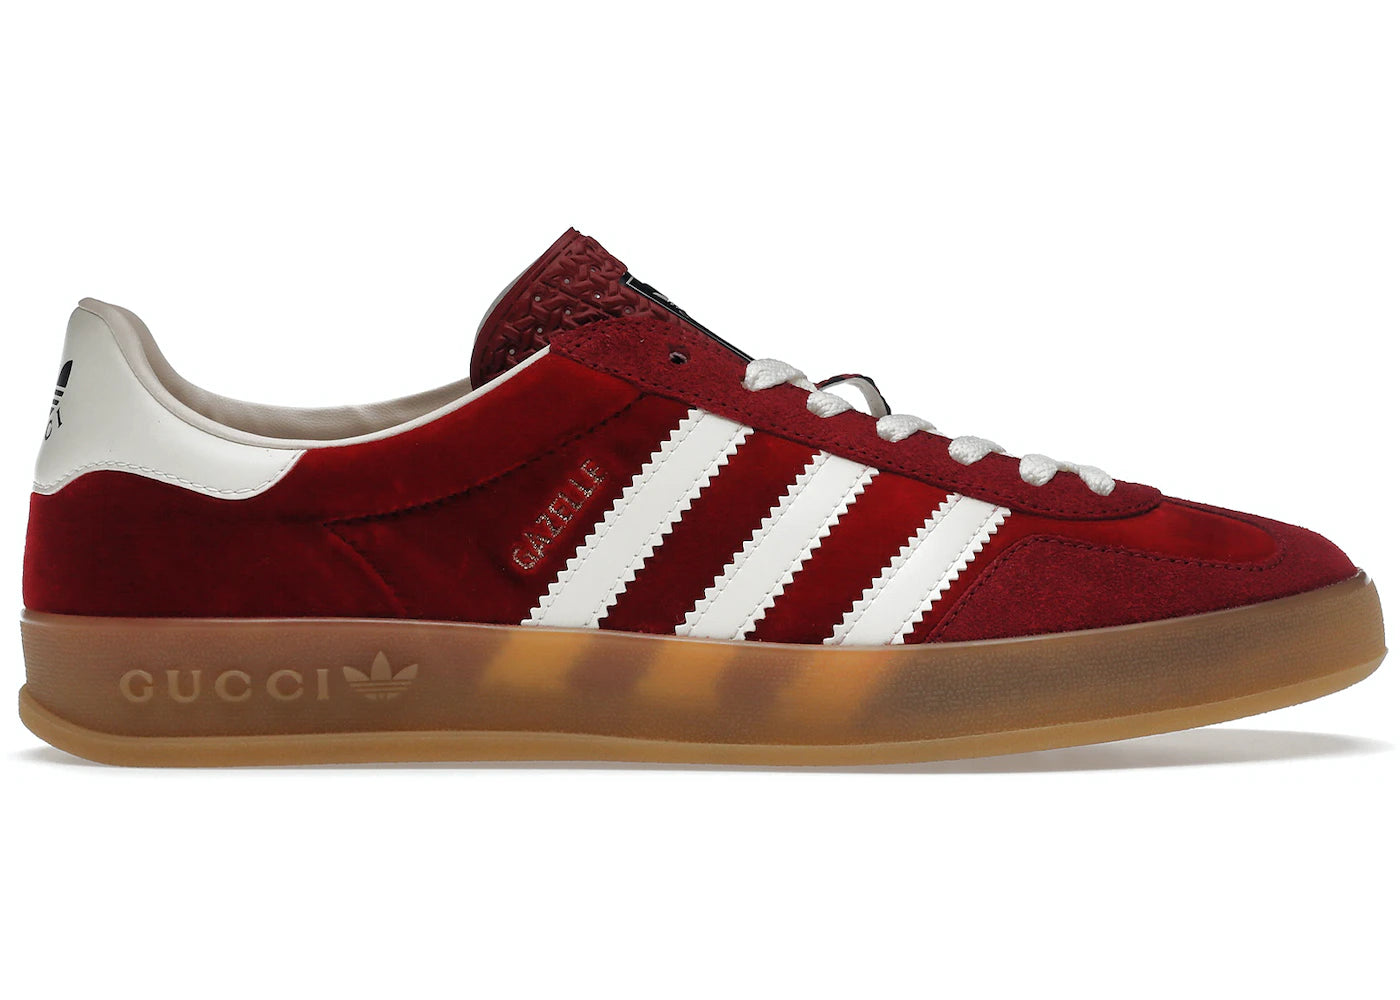 ADIDAS X GUCCI RED - Slocog Sneakers Sale Online - adidas cc1 white ftw white ftw white triple white